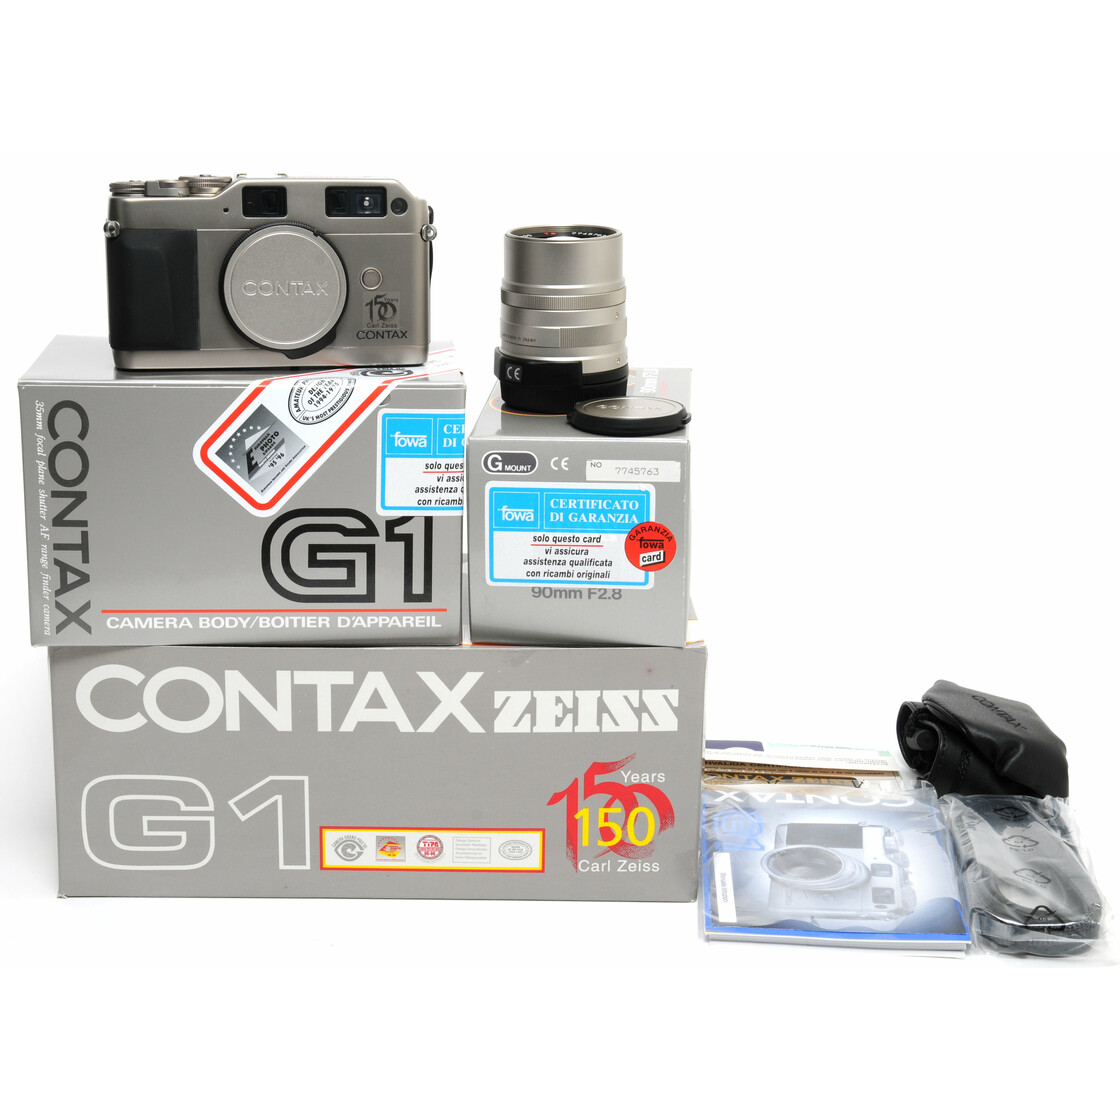 Contax G1 150 Years Carl Zeiss Edition NEW boxed w. Sonnar 2.8/90mm